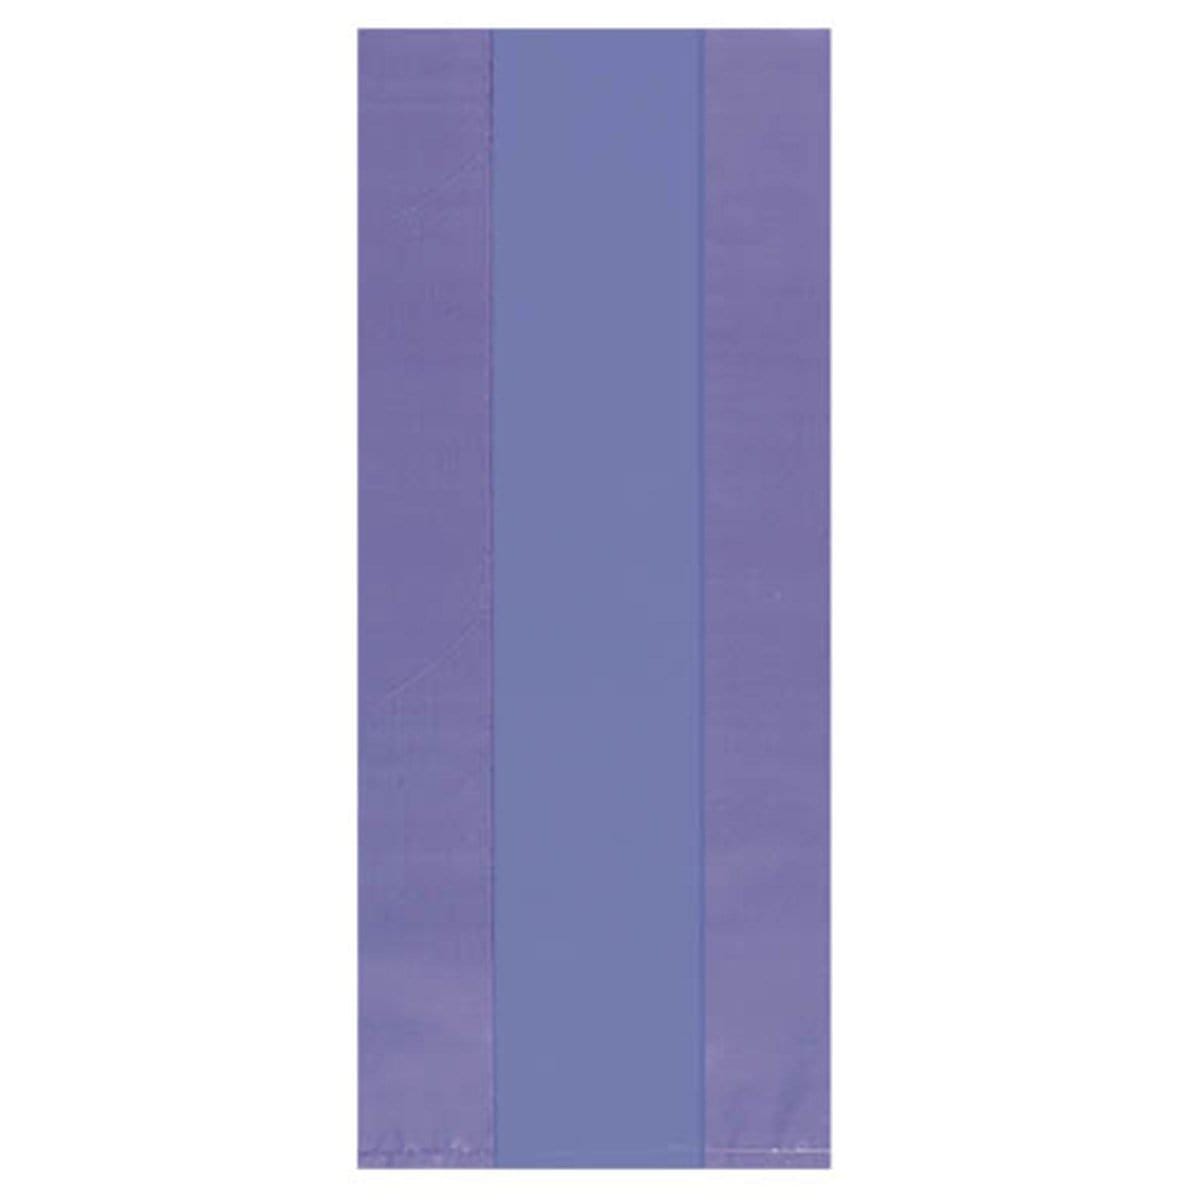 Buy Party Supplies Cello Bags - Purple 9.5 x 4 x 2.25 in. 25/pkg sold at Party Expert